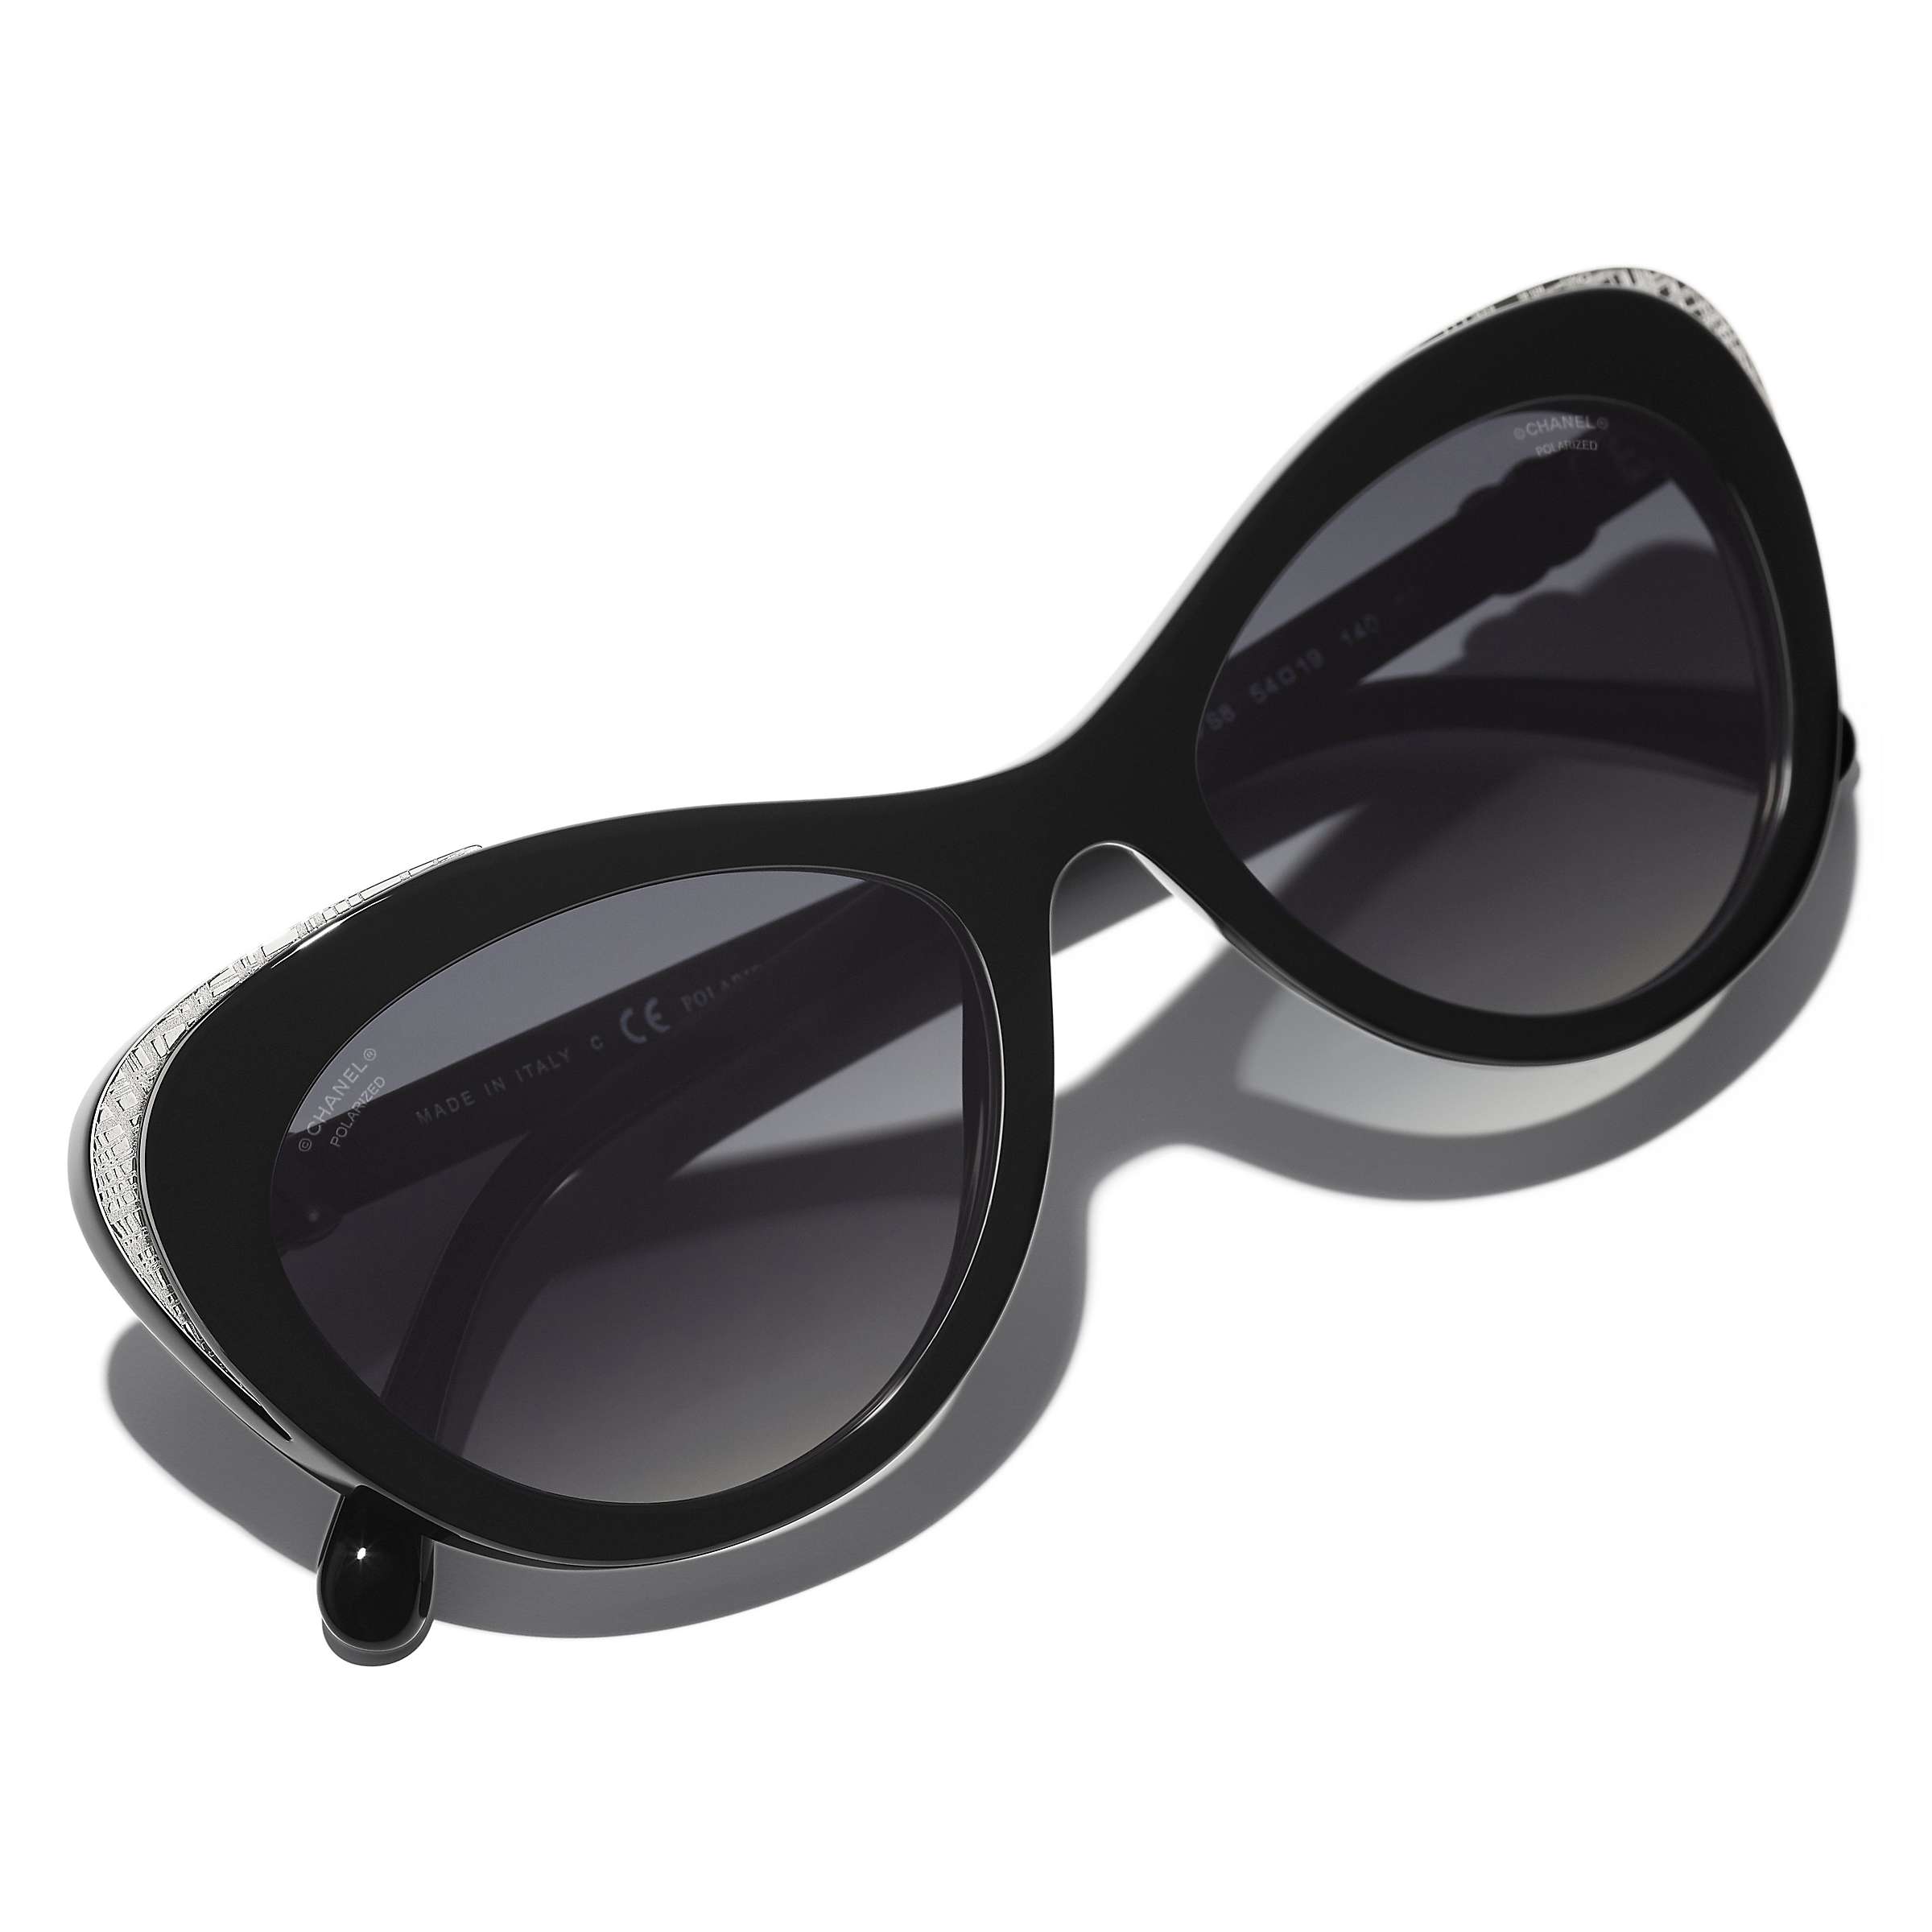 CHANEL Butterfly Sunglasses CH5432 Black/Grey Gradient at John Lewis